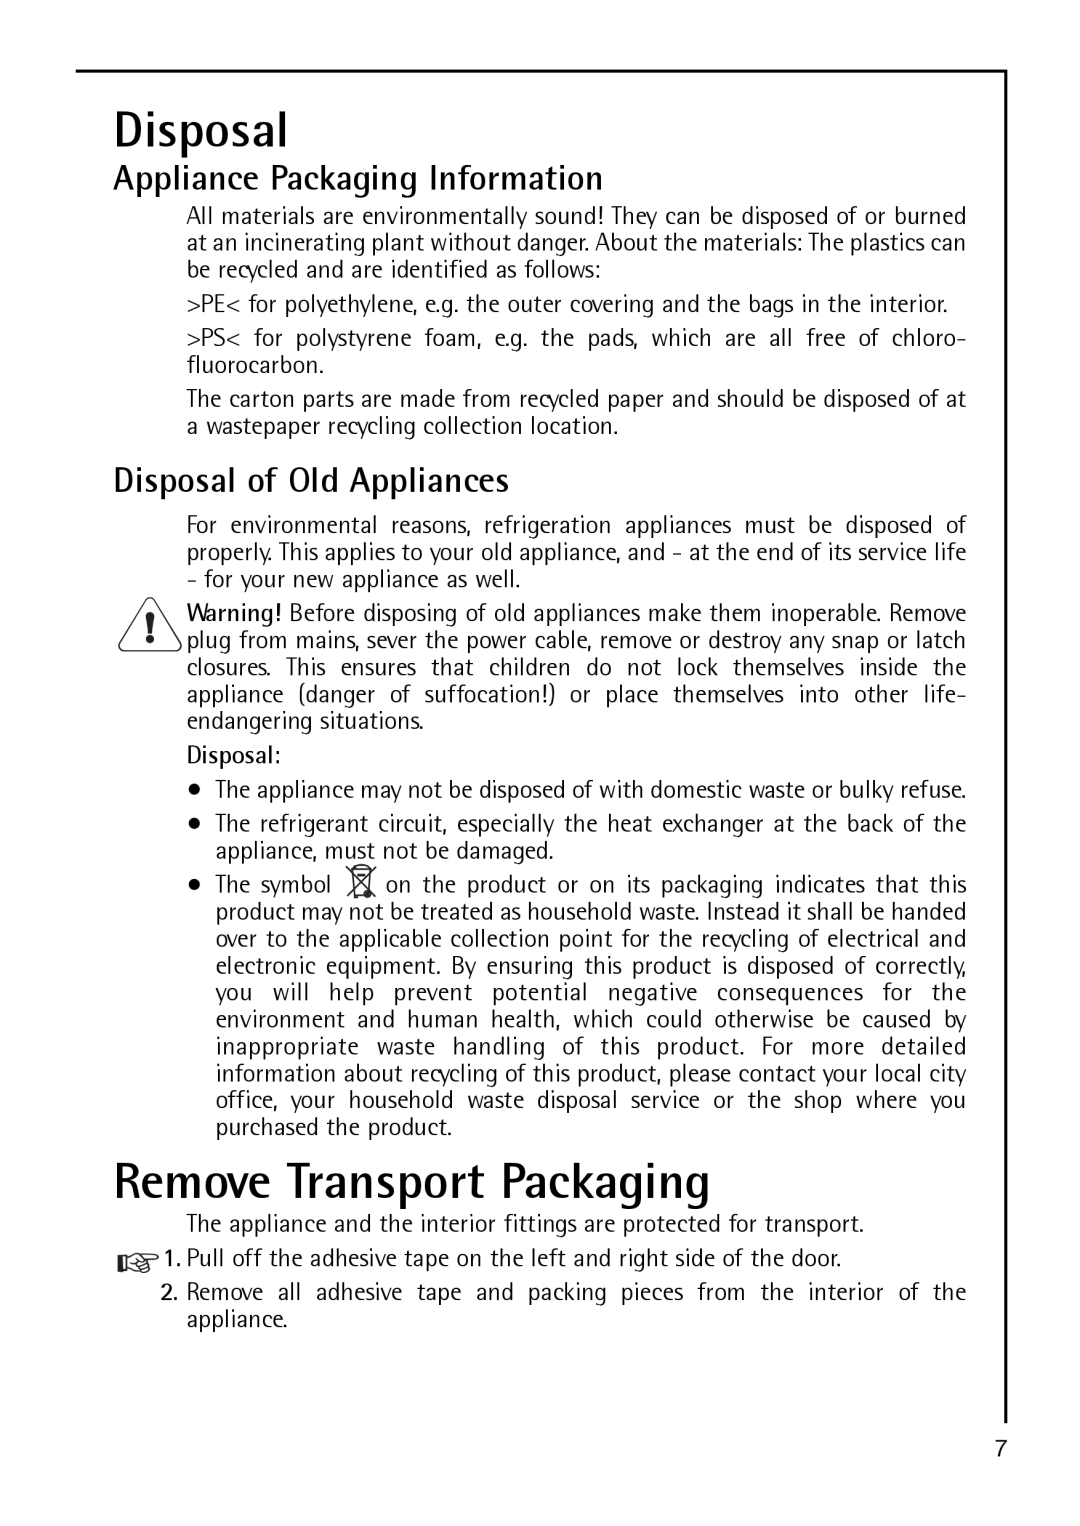 AEG S 60150 TK manual Remove Transport Packaging, Appliance Packaging Information, Disposal of Old Appliances 